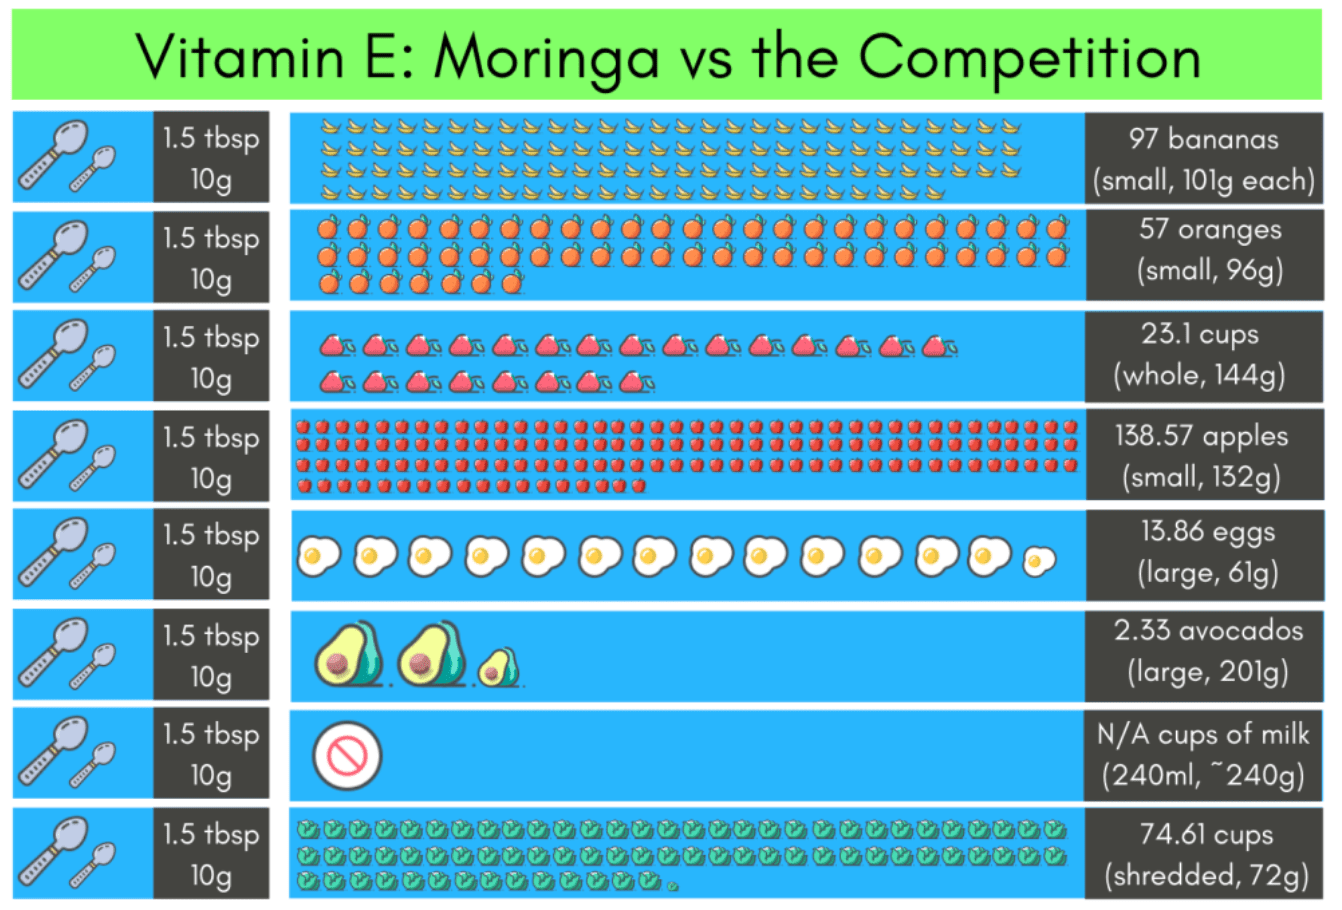 An image of Moringa vs the competition in vitamin E